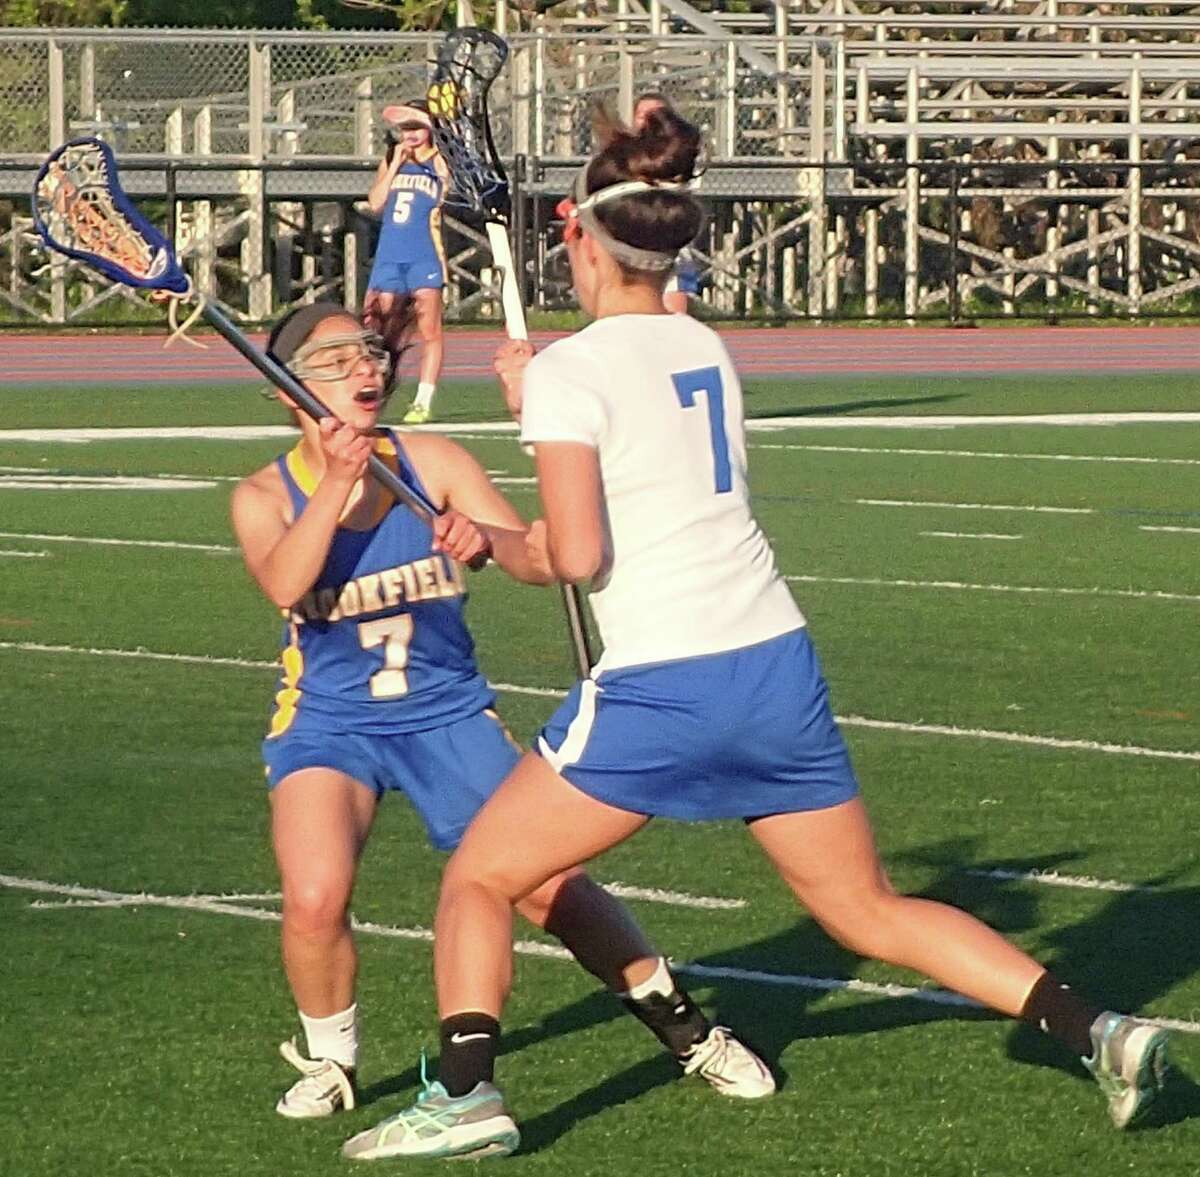 Danbury's Danielle Reisert, right, looks for room to maneuver as Brookfield's Julia Fernandez defends during their lacrosse game at Danbury High School May 16, 2016.